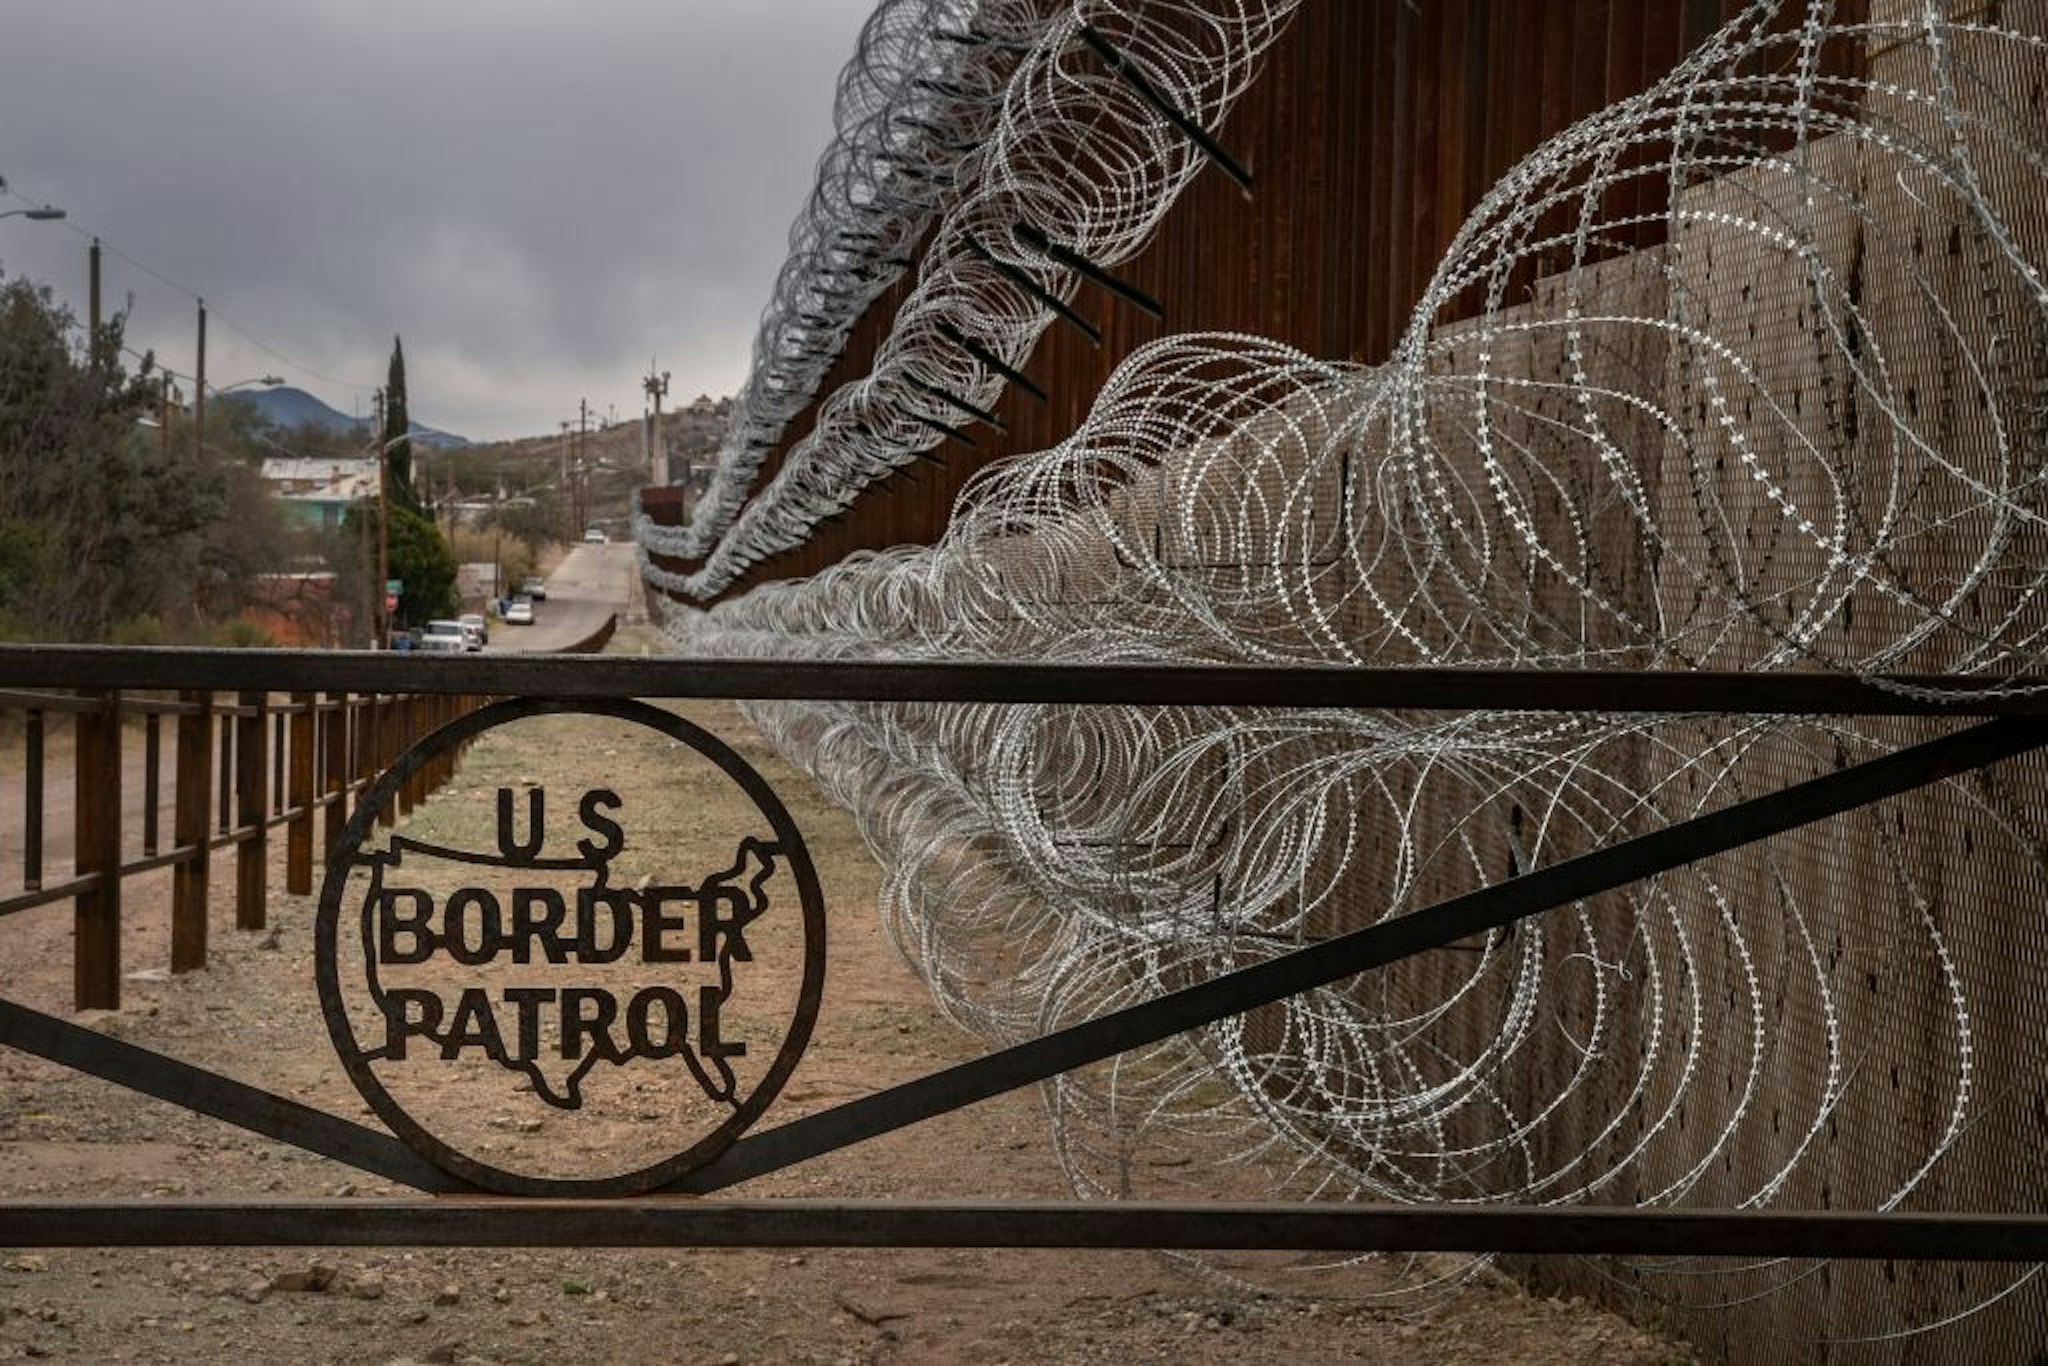 TOPSHOT - A metal fence marked with the US Border Patrol sign prevents people to get close to the barbed/concertina wire covering the US/Mexico border fence, in Nogales, Arizona, on February 9, 2019. (Photo by Ariana Drehsler / AFP) (